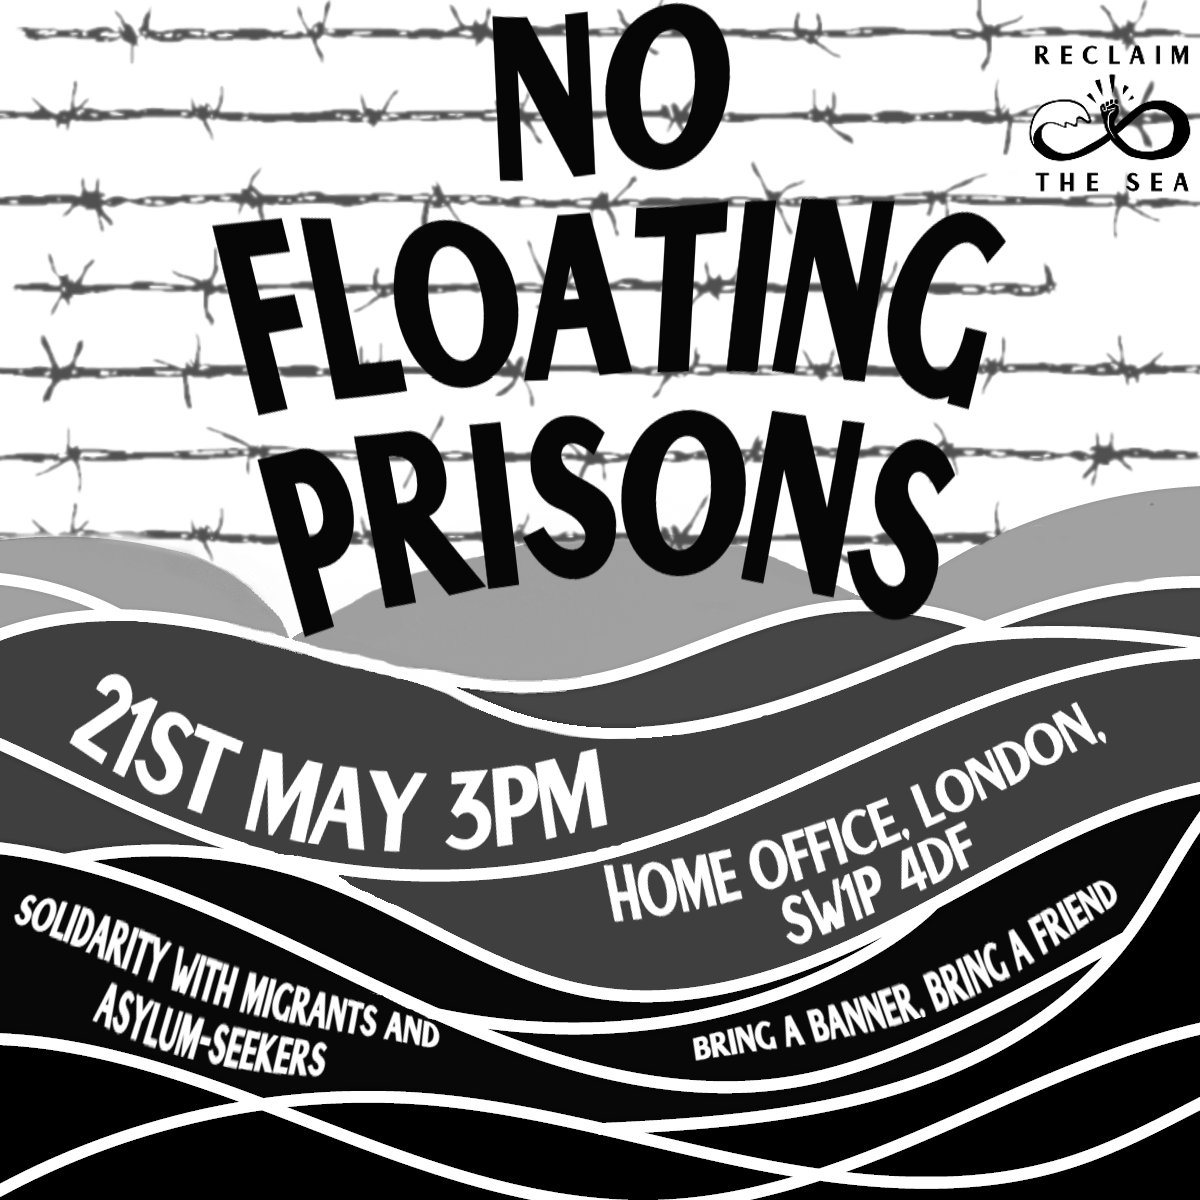 NO FLOATING PRISONS - Double Demonstration outside the Home Office, London, and at the #BibbyStockholm current location in Falmouth. Sunday, 3pm. Bring a banner, bring your friends. 

Solidarity with migrants and asylum seekers.

#NoFloatingPrisons #StopTheBill #MigrantRights